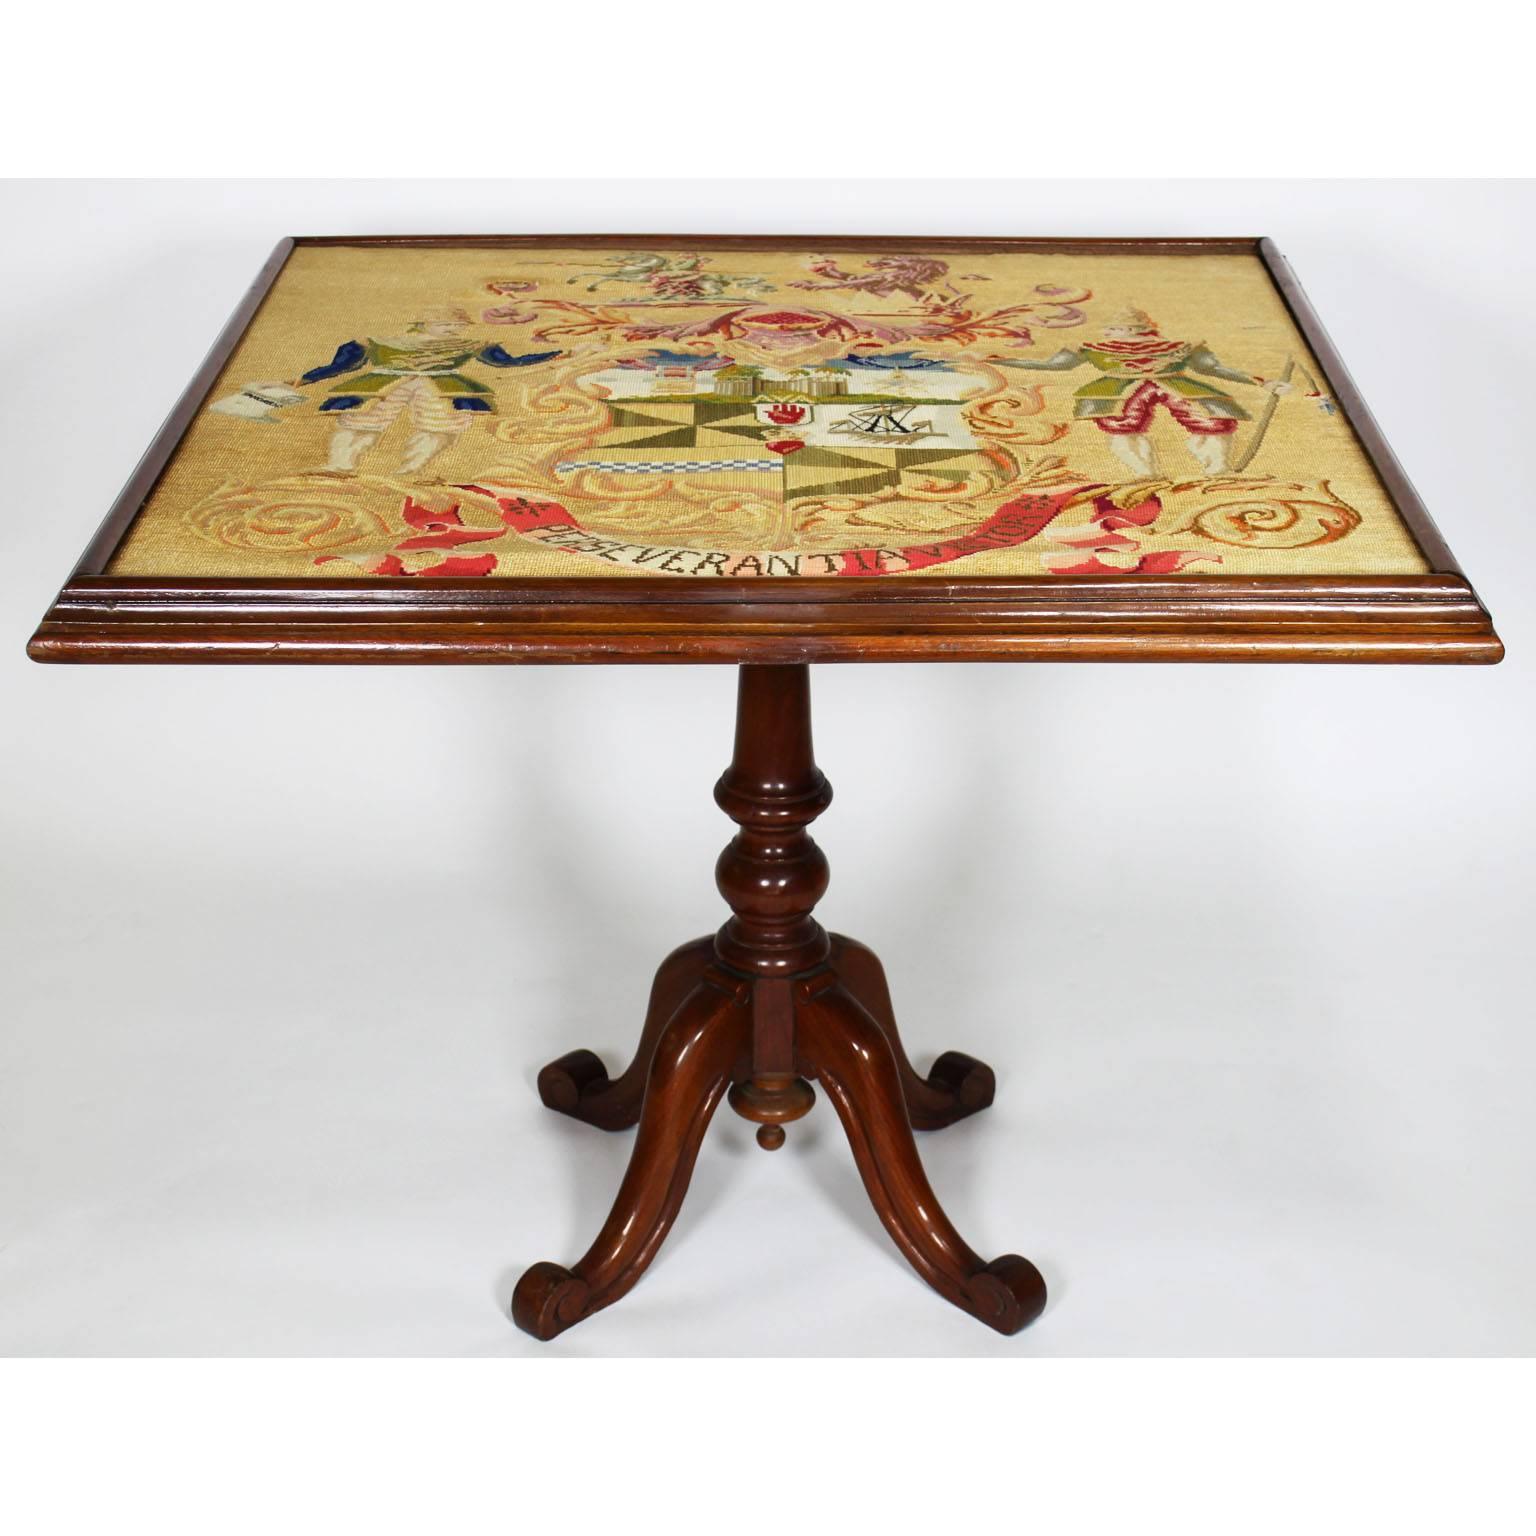 An English late 19th century mahogany and needlepoint Victorian tilt-top game table. The square top mounted with a figural needlepoint coat-of-arms "Perseverantia Victor", London, circa 1890.

Measures: Height (Tilted) 48 1/4 inches